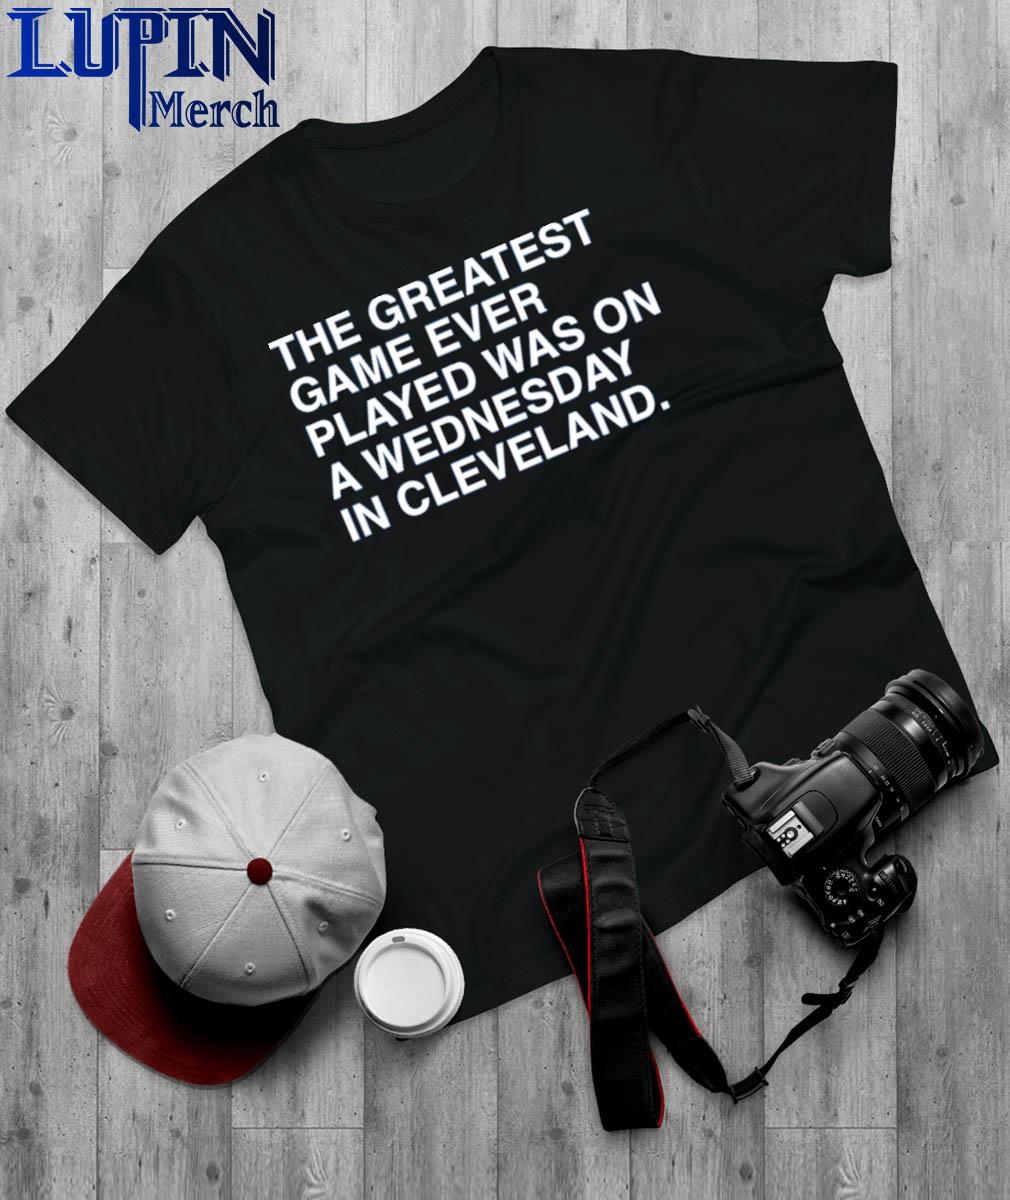 The Greatest Game Ever Played Was on A Wednesday in Cleveland T-Shirt